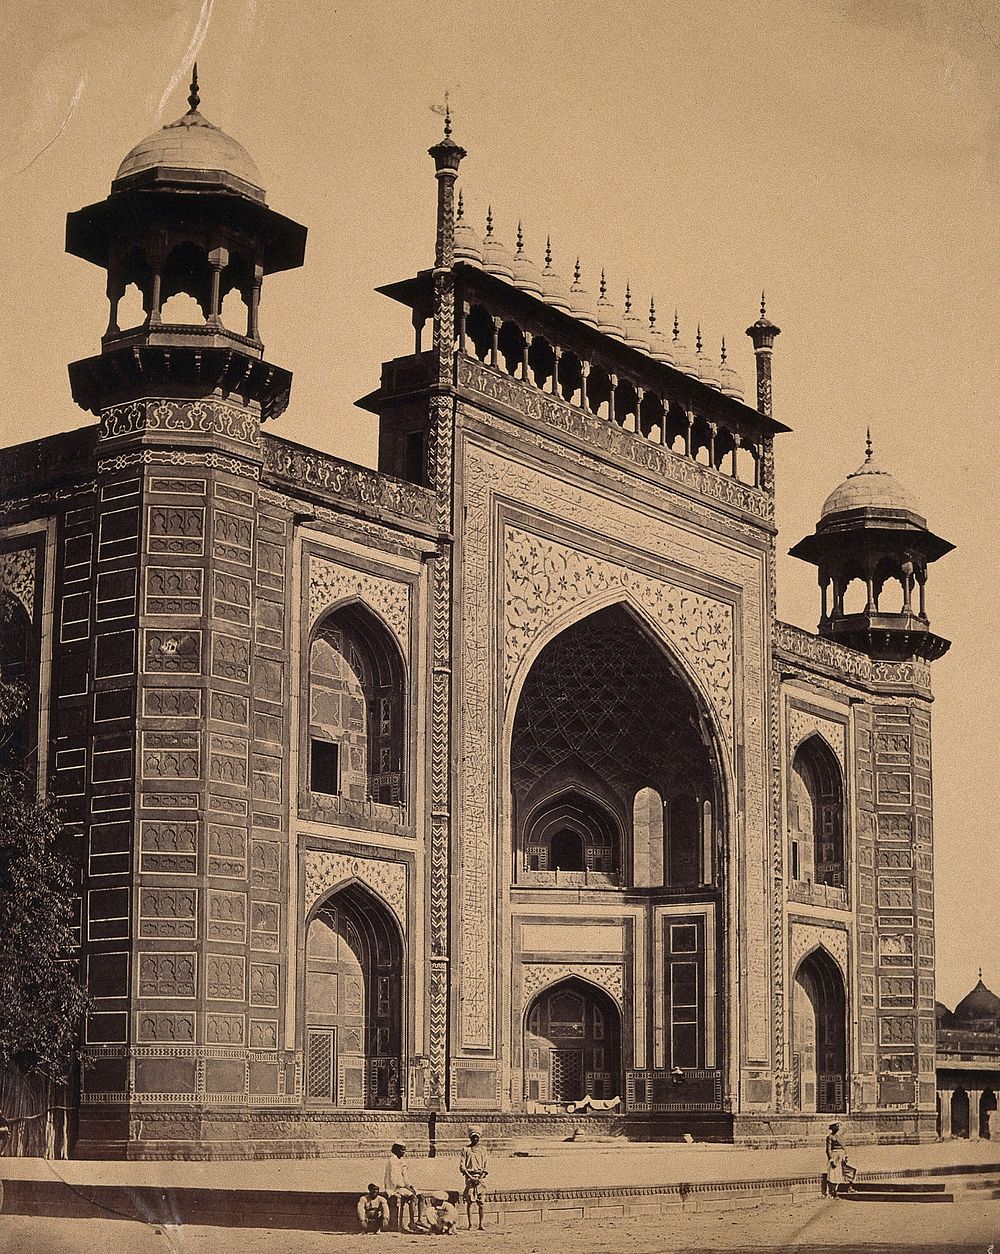 Agra, India: a large ornate building. Photograph by Felice Beato, ca. 1858.